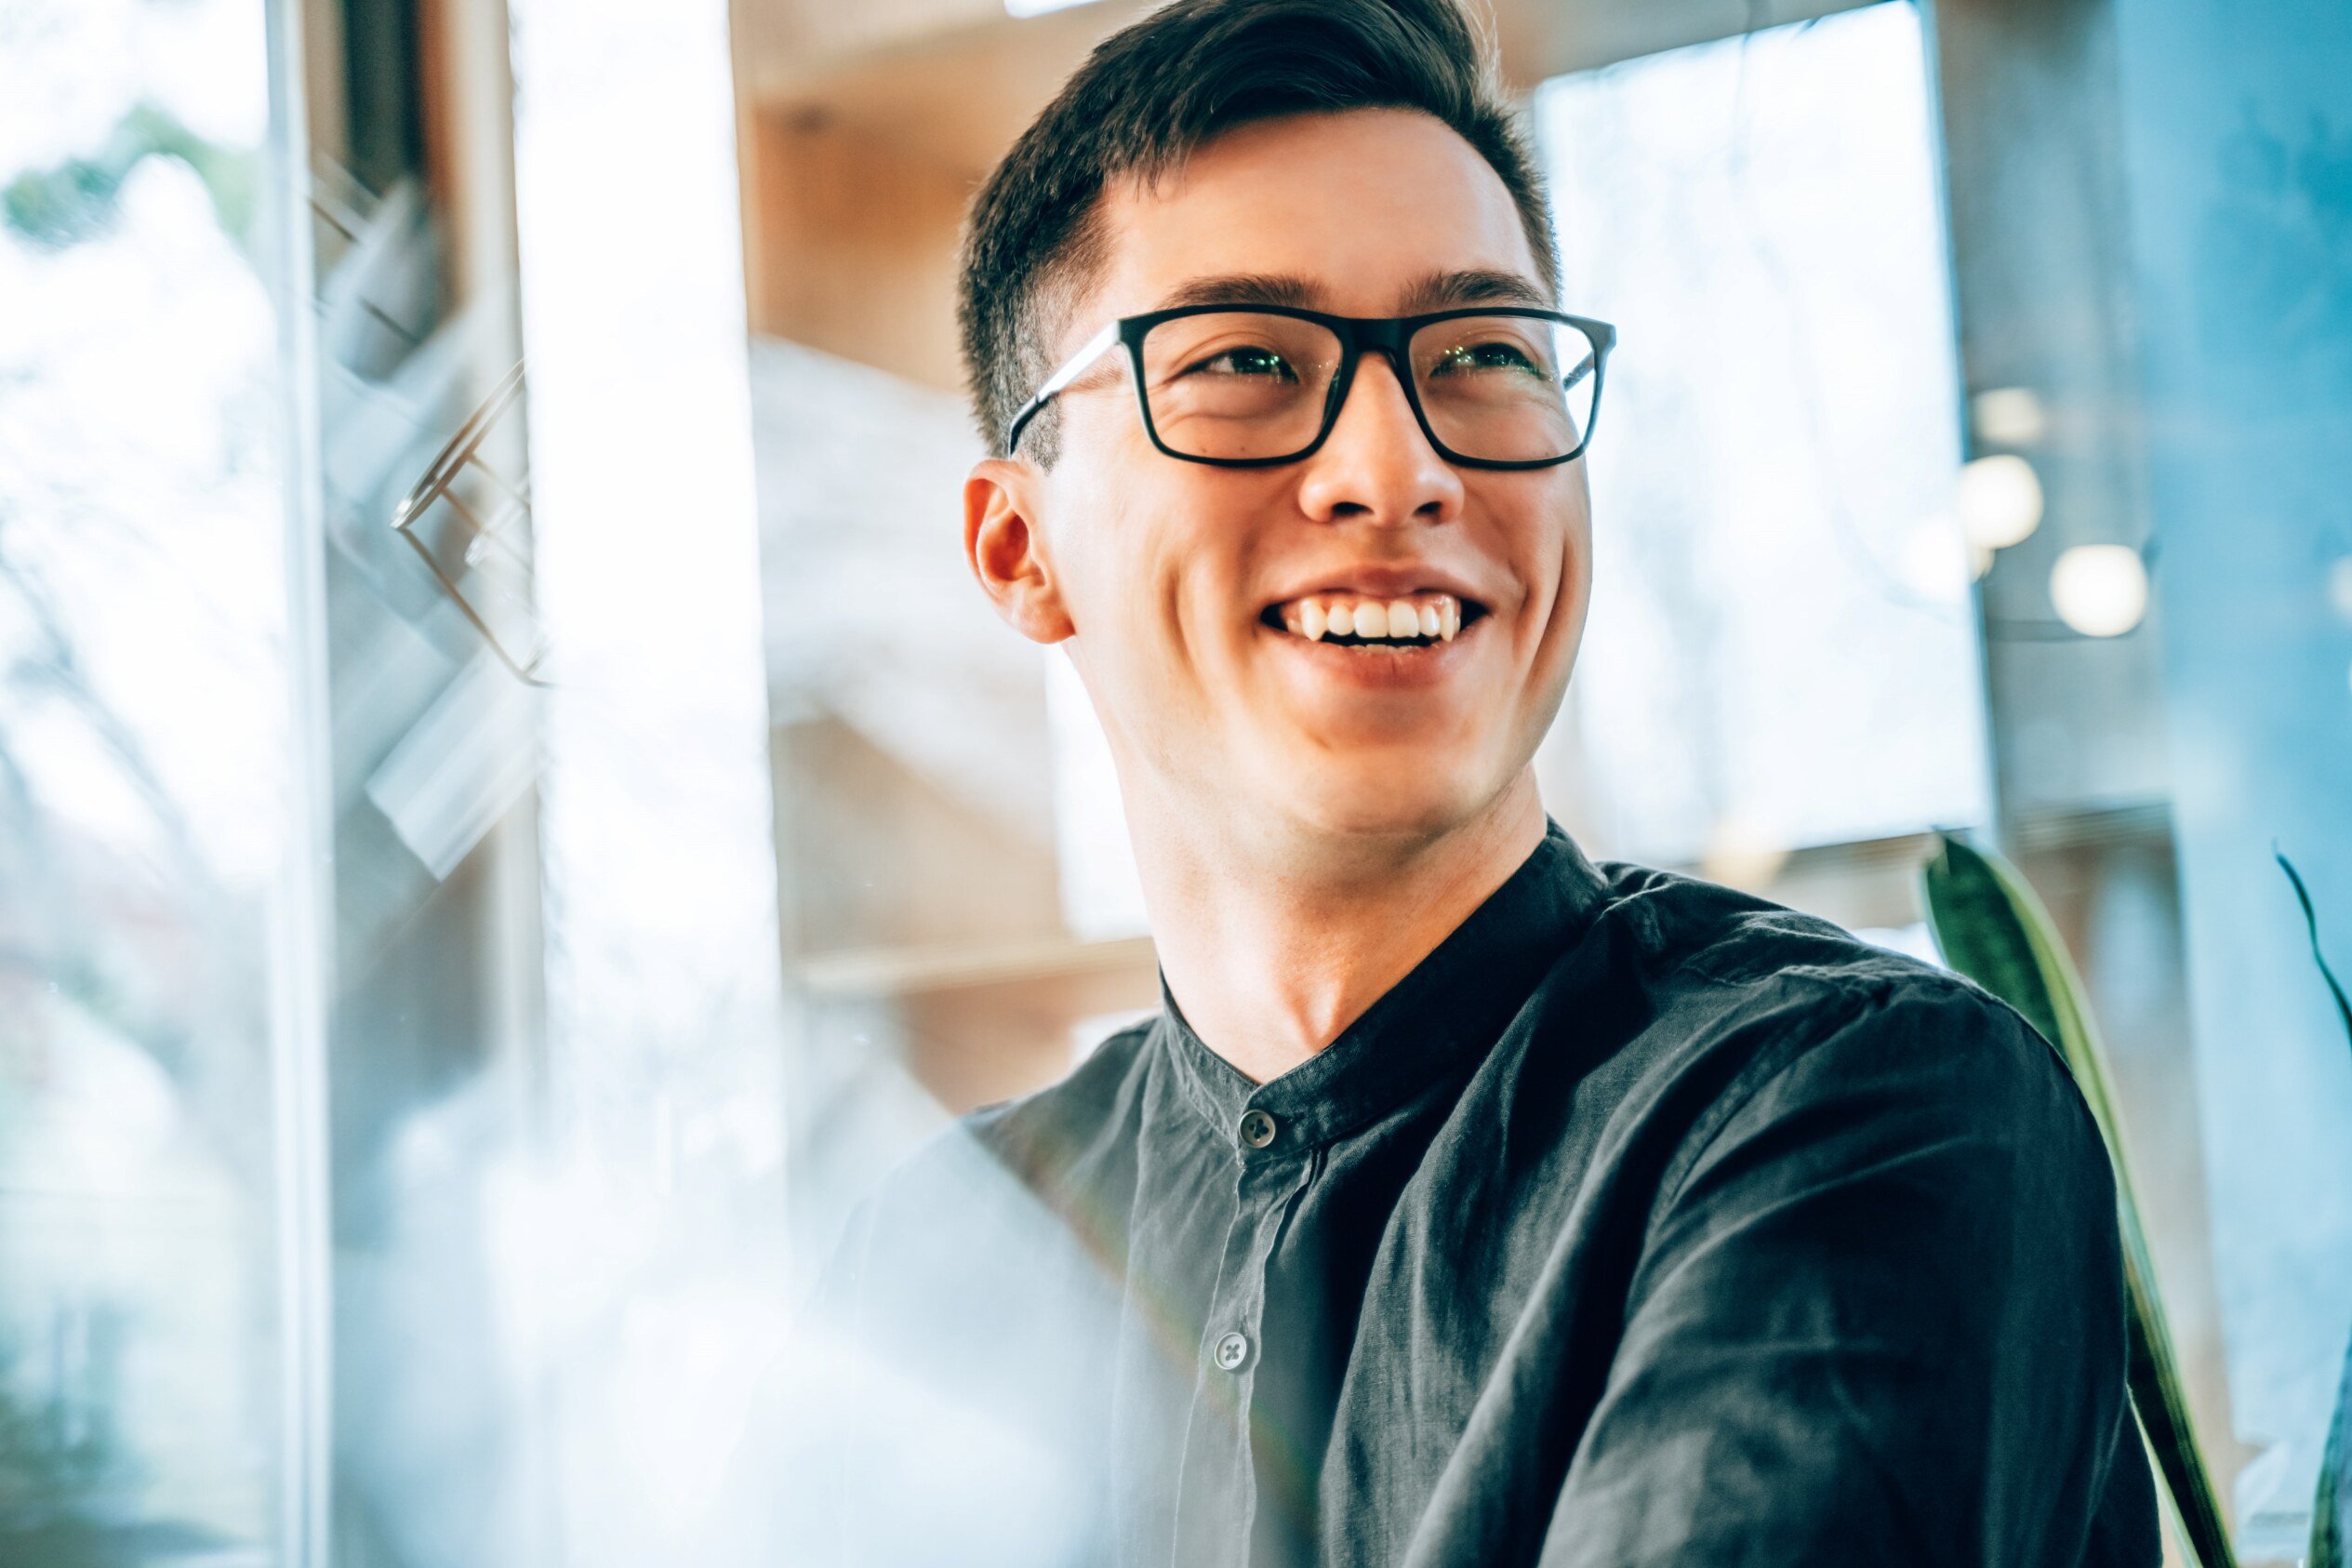 Man in glasses and button up shirt, smiling.